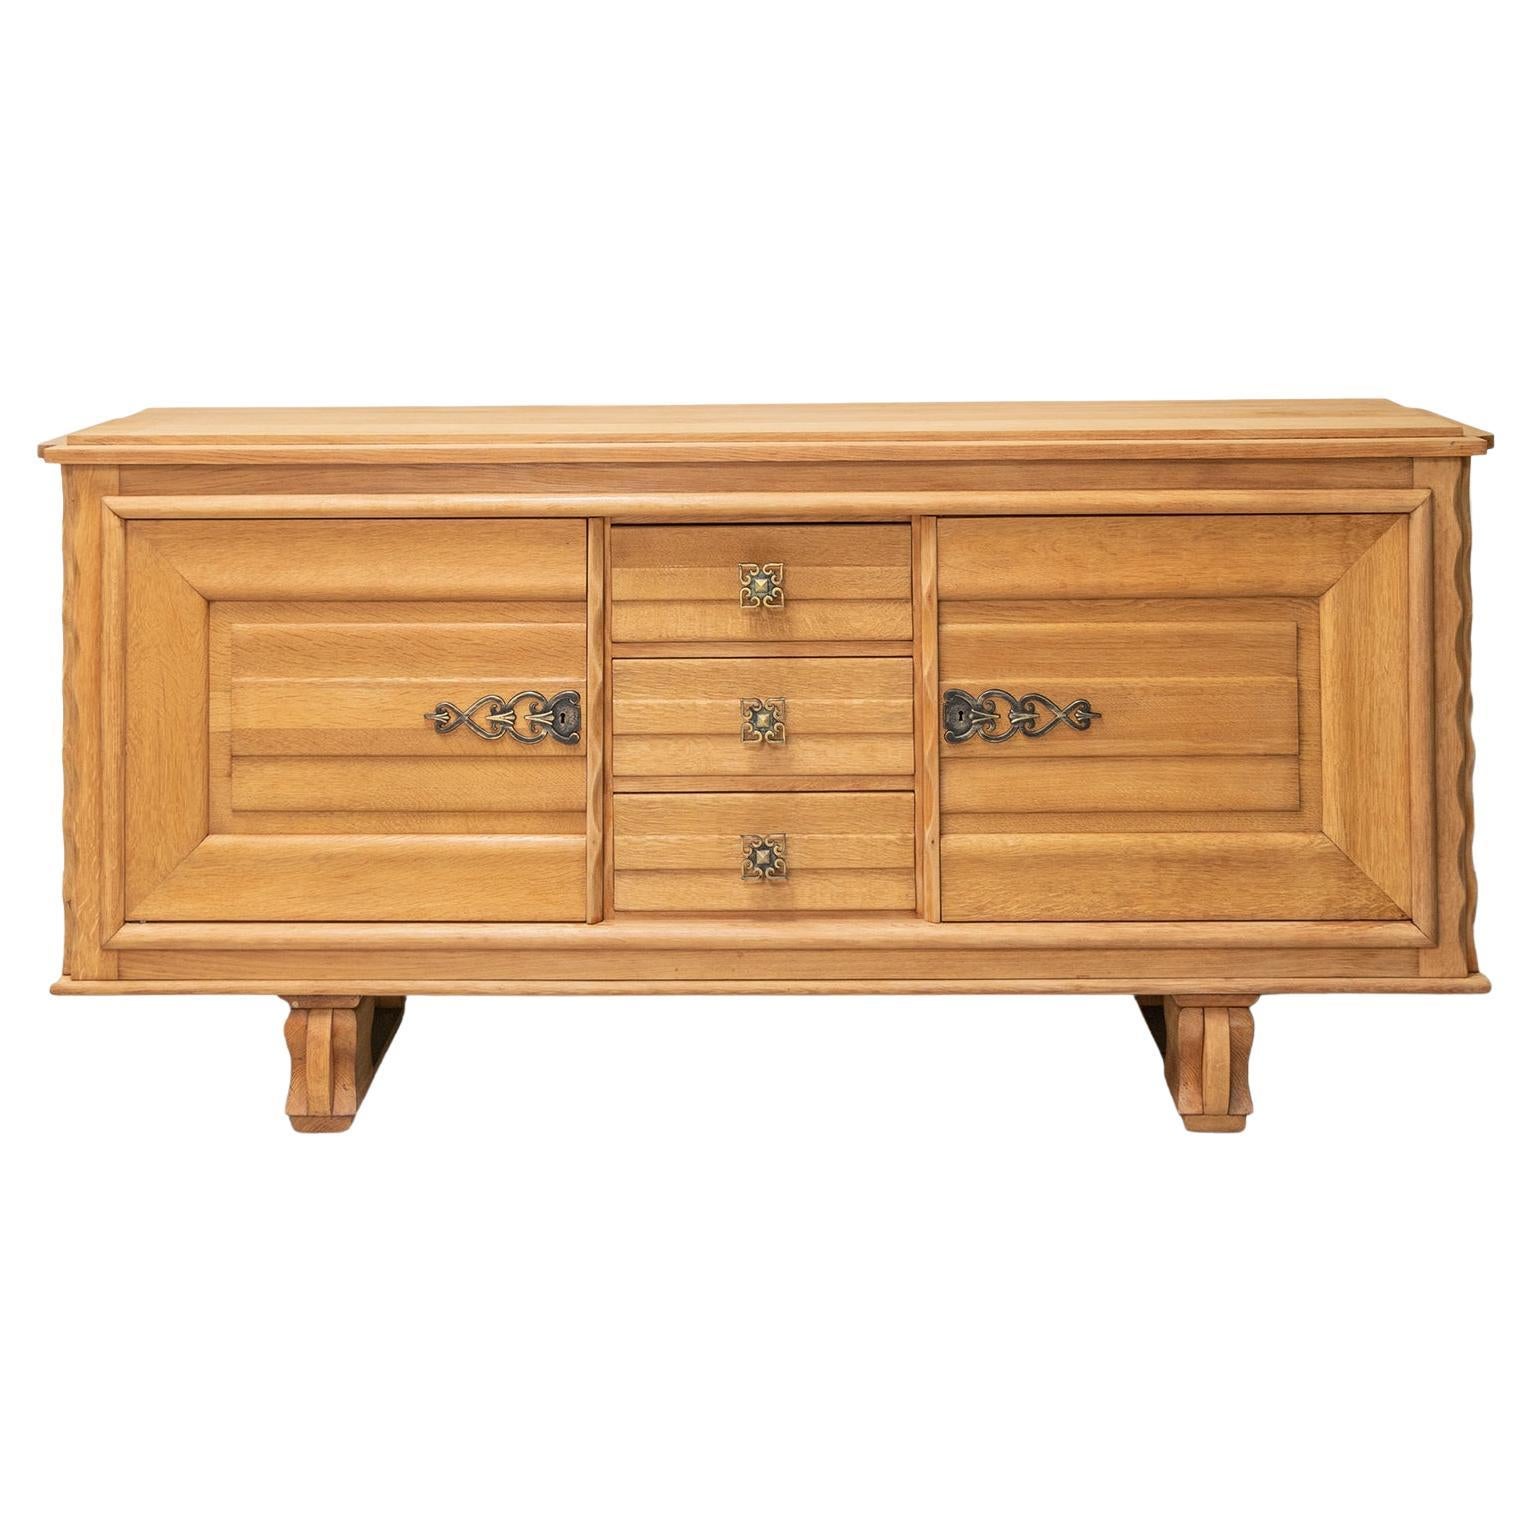 1940s French Scalloped Oak Sideboard For Sale